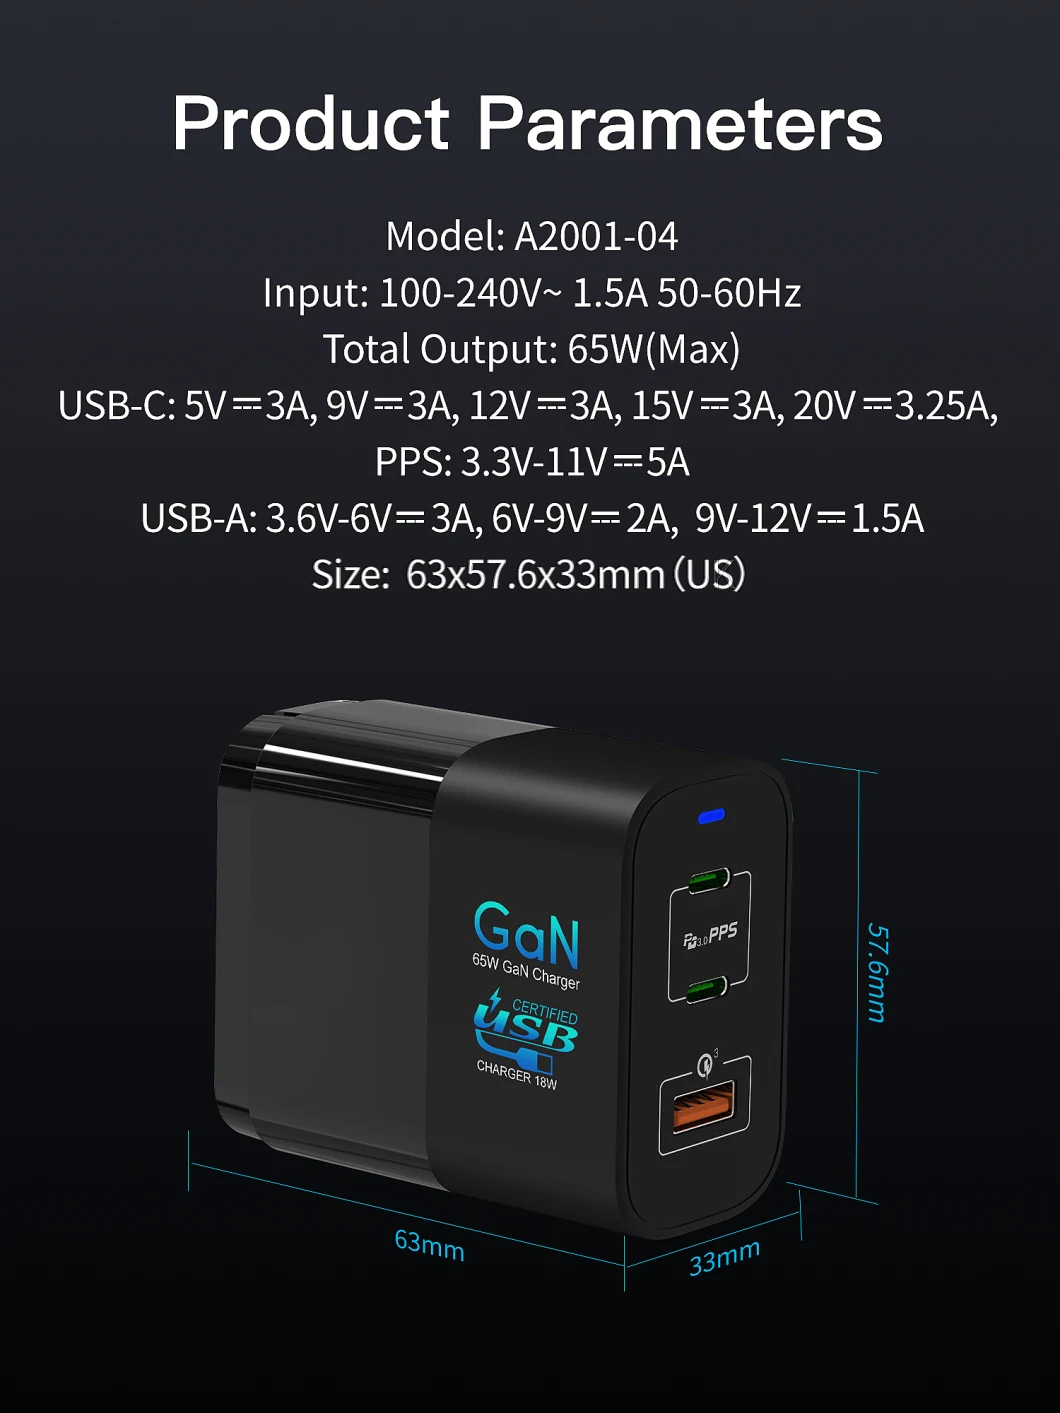 65W GaN Pd USB Type C Fast Charge Wall Charger for MacBook PRO